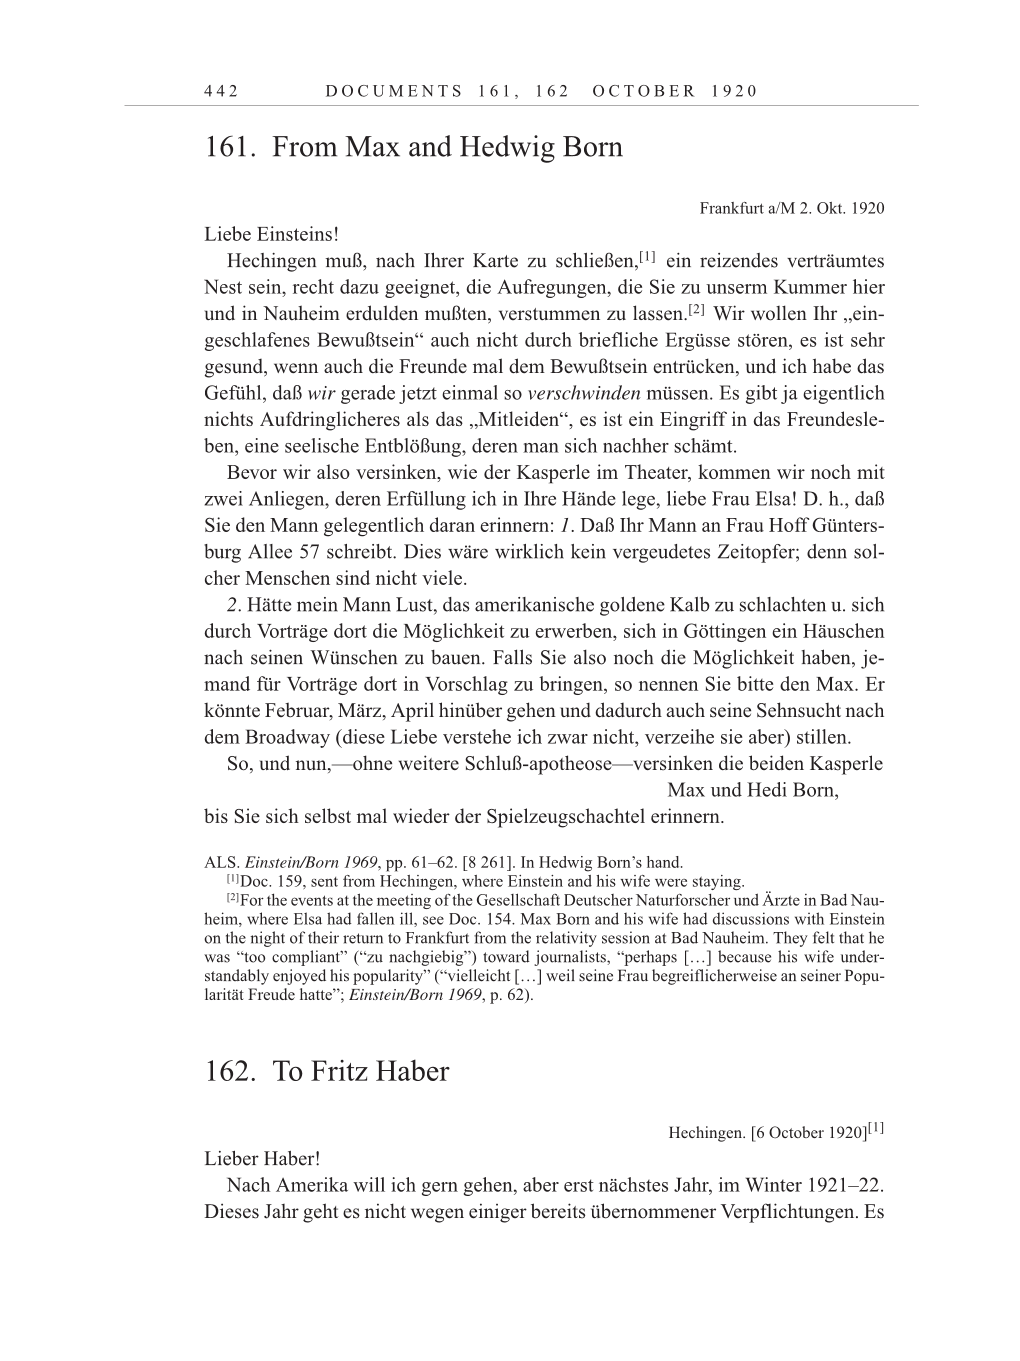 Volume 10: The Berlin Years: Correspondence May-December 1920 / Supplementary Correspondence 1909-1920 page 442